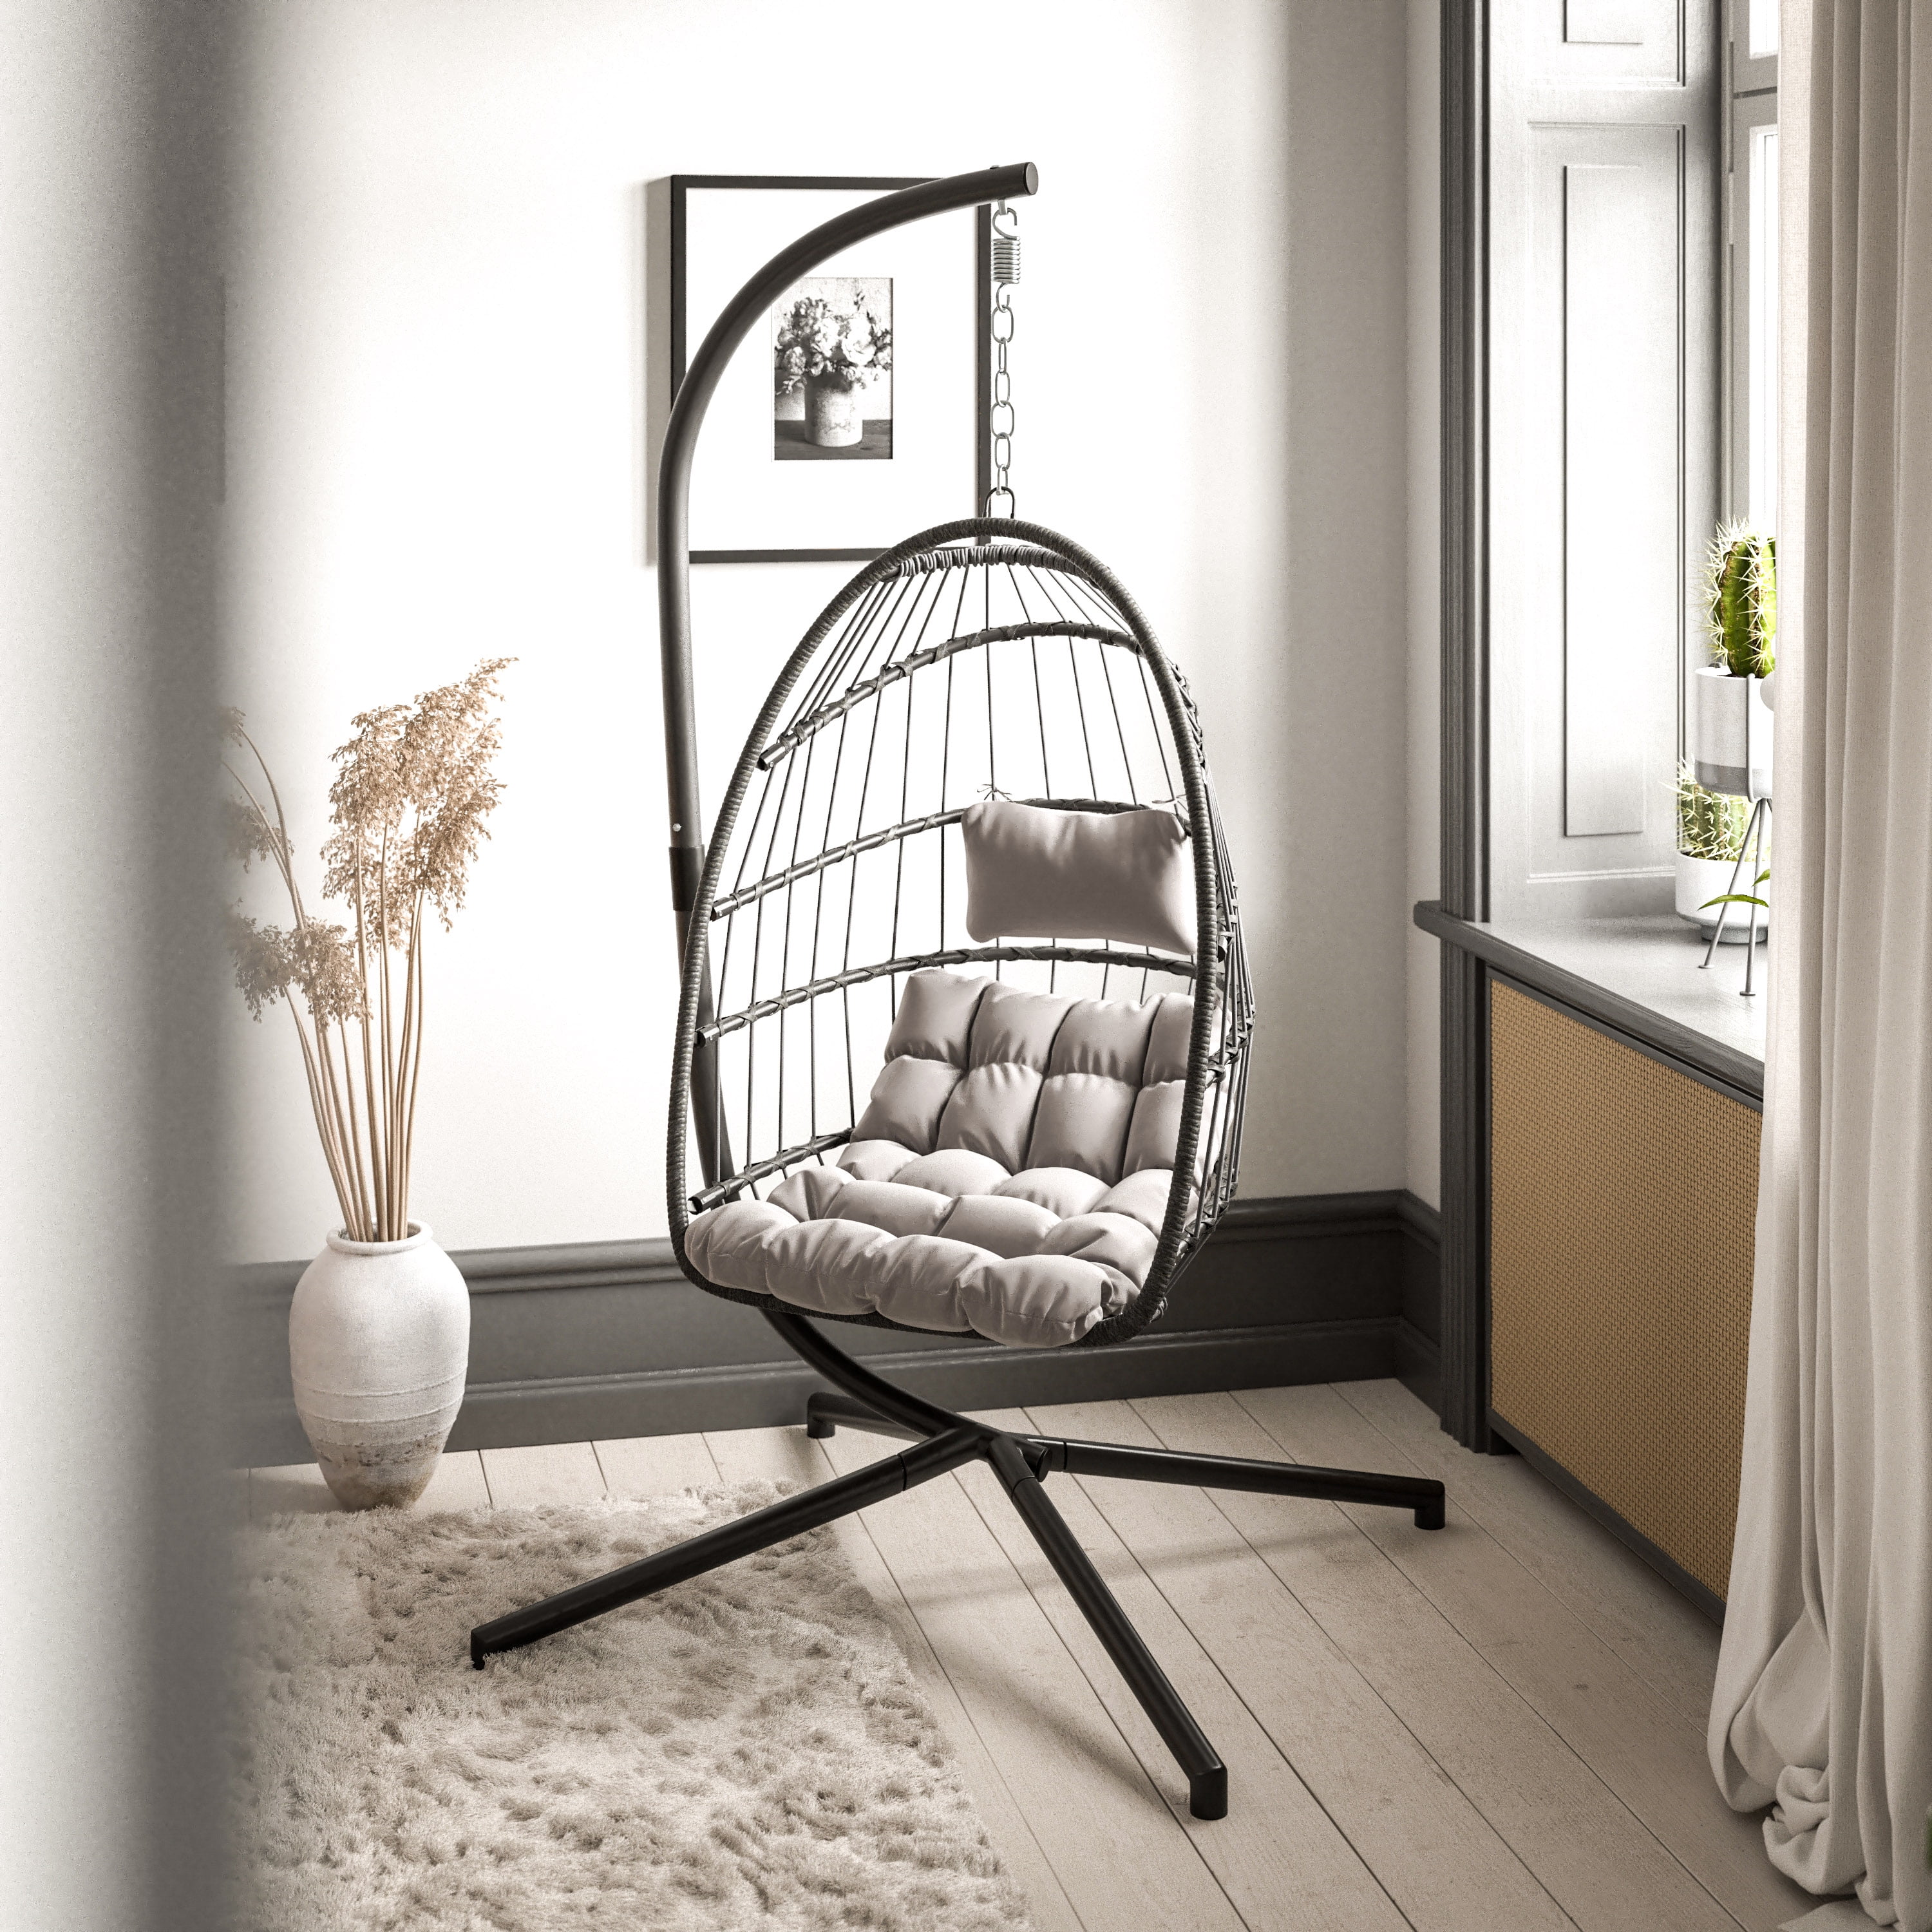 Observatie Intimidatie botsing Emma + Oliver Foldable Hanging Egg Chair with Gray Woven Finish, Removable  Gray Cushions, and Included Stand for Indoor and Outdoor Use - Walmart.com